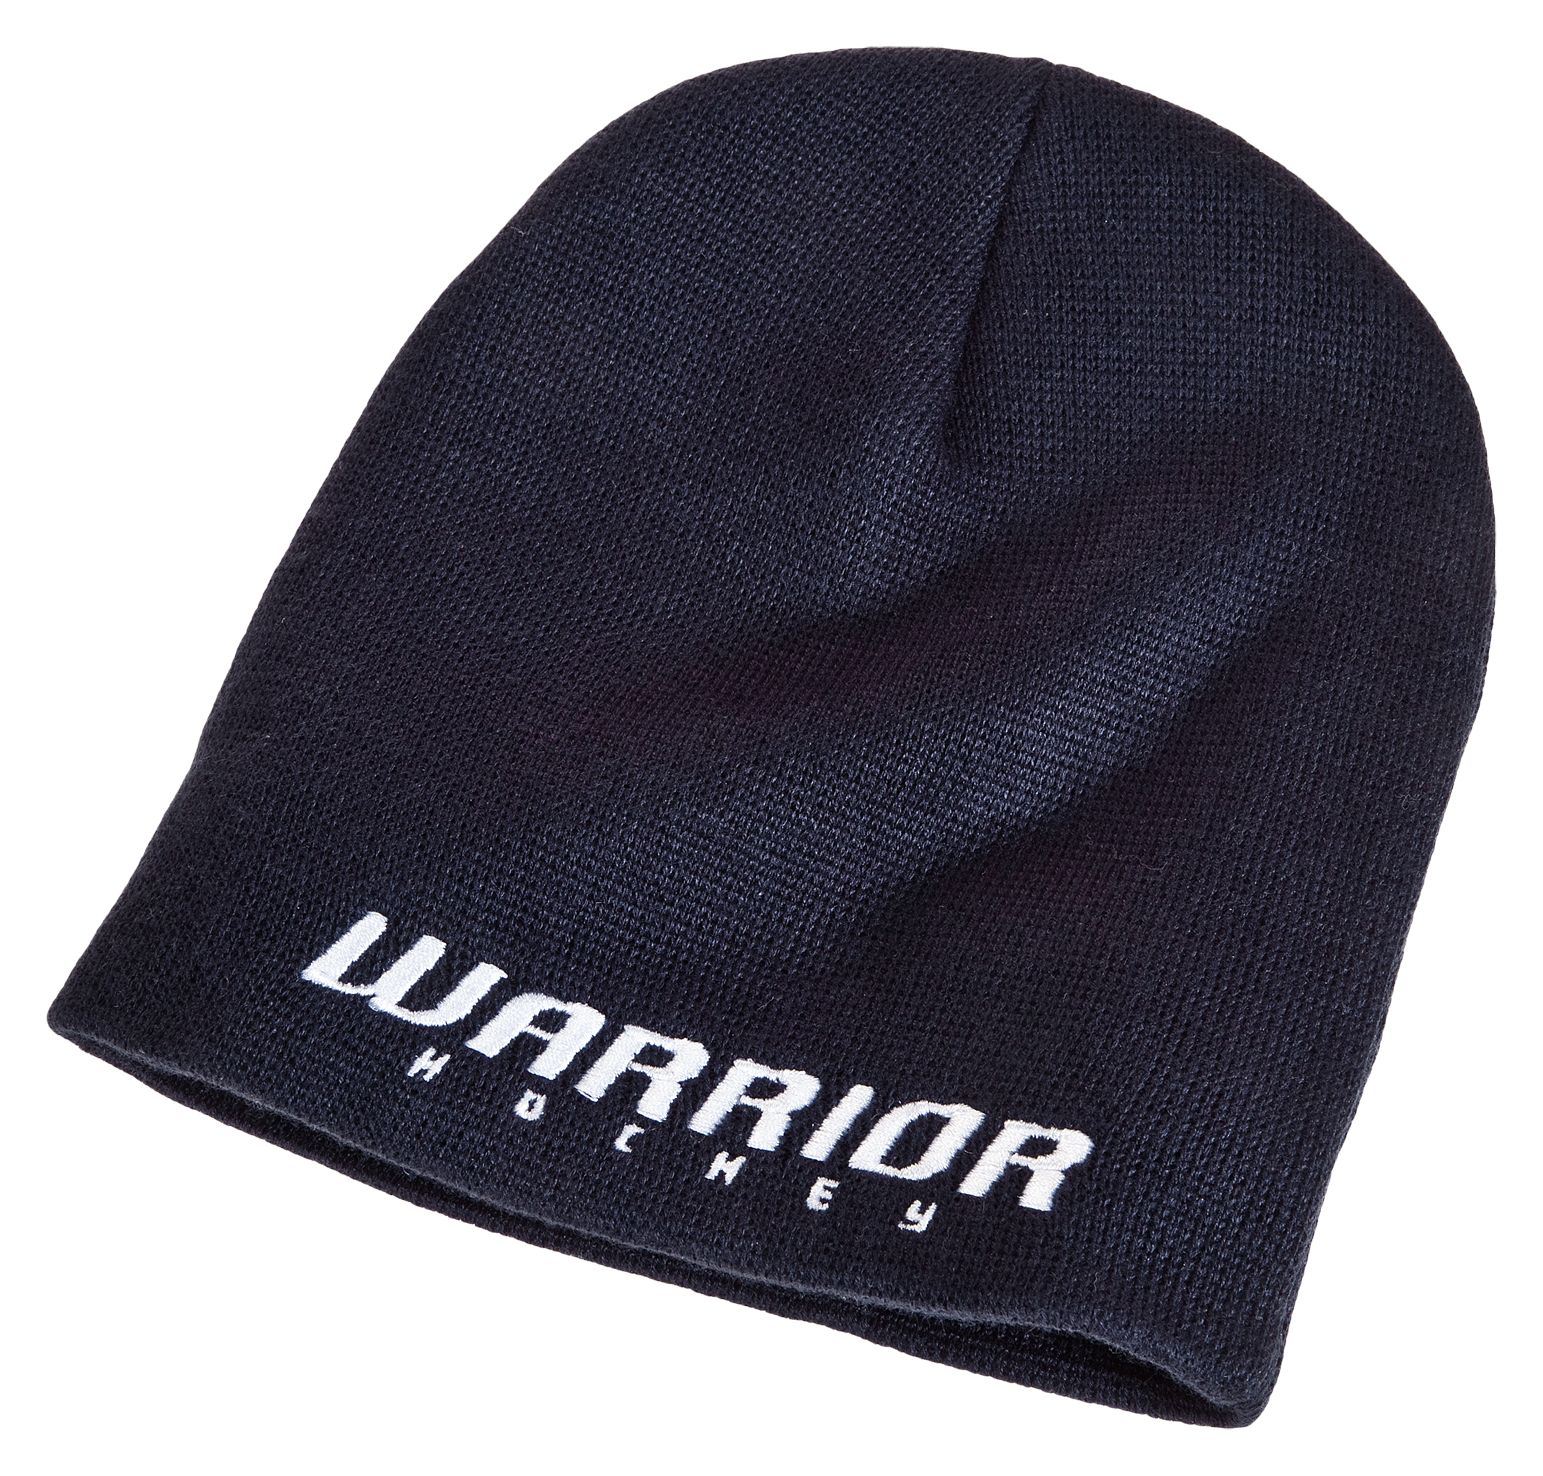 Youth Hockey Beanie, Navy with White image number 1